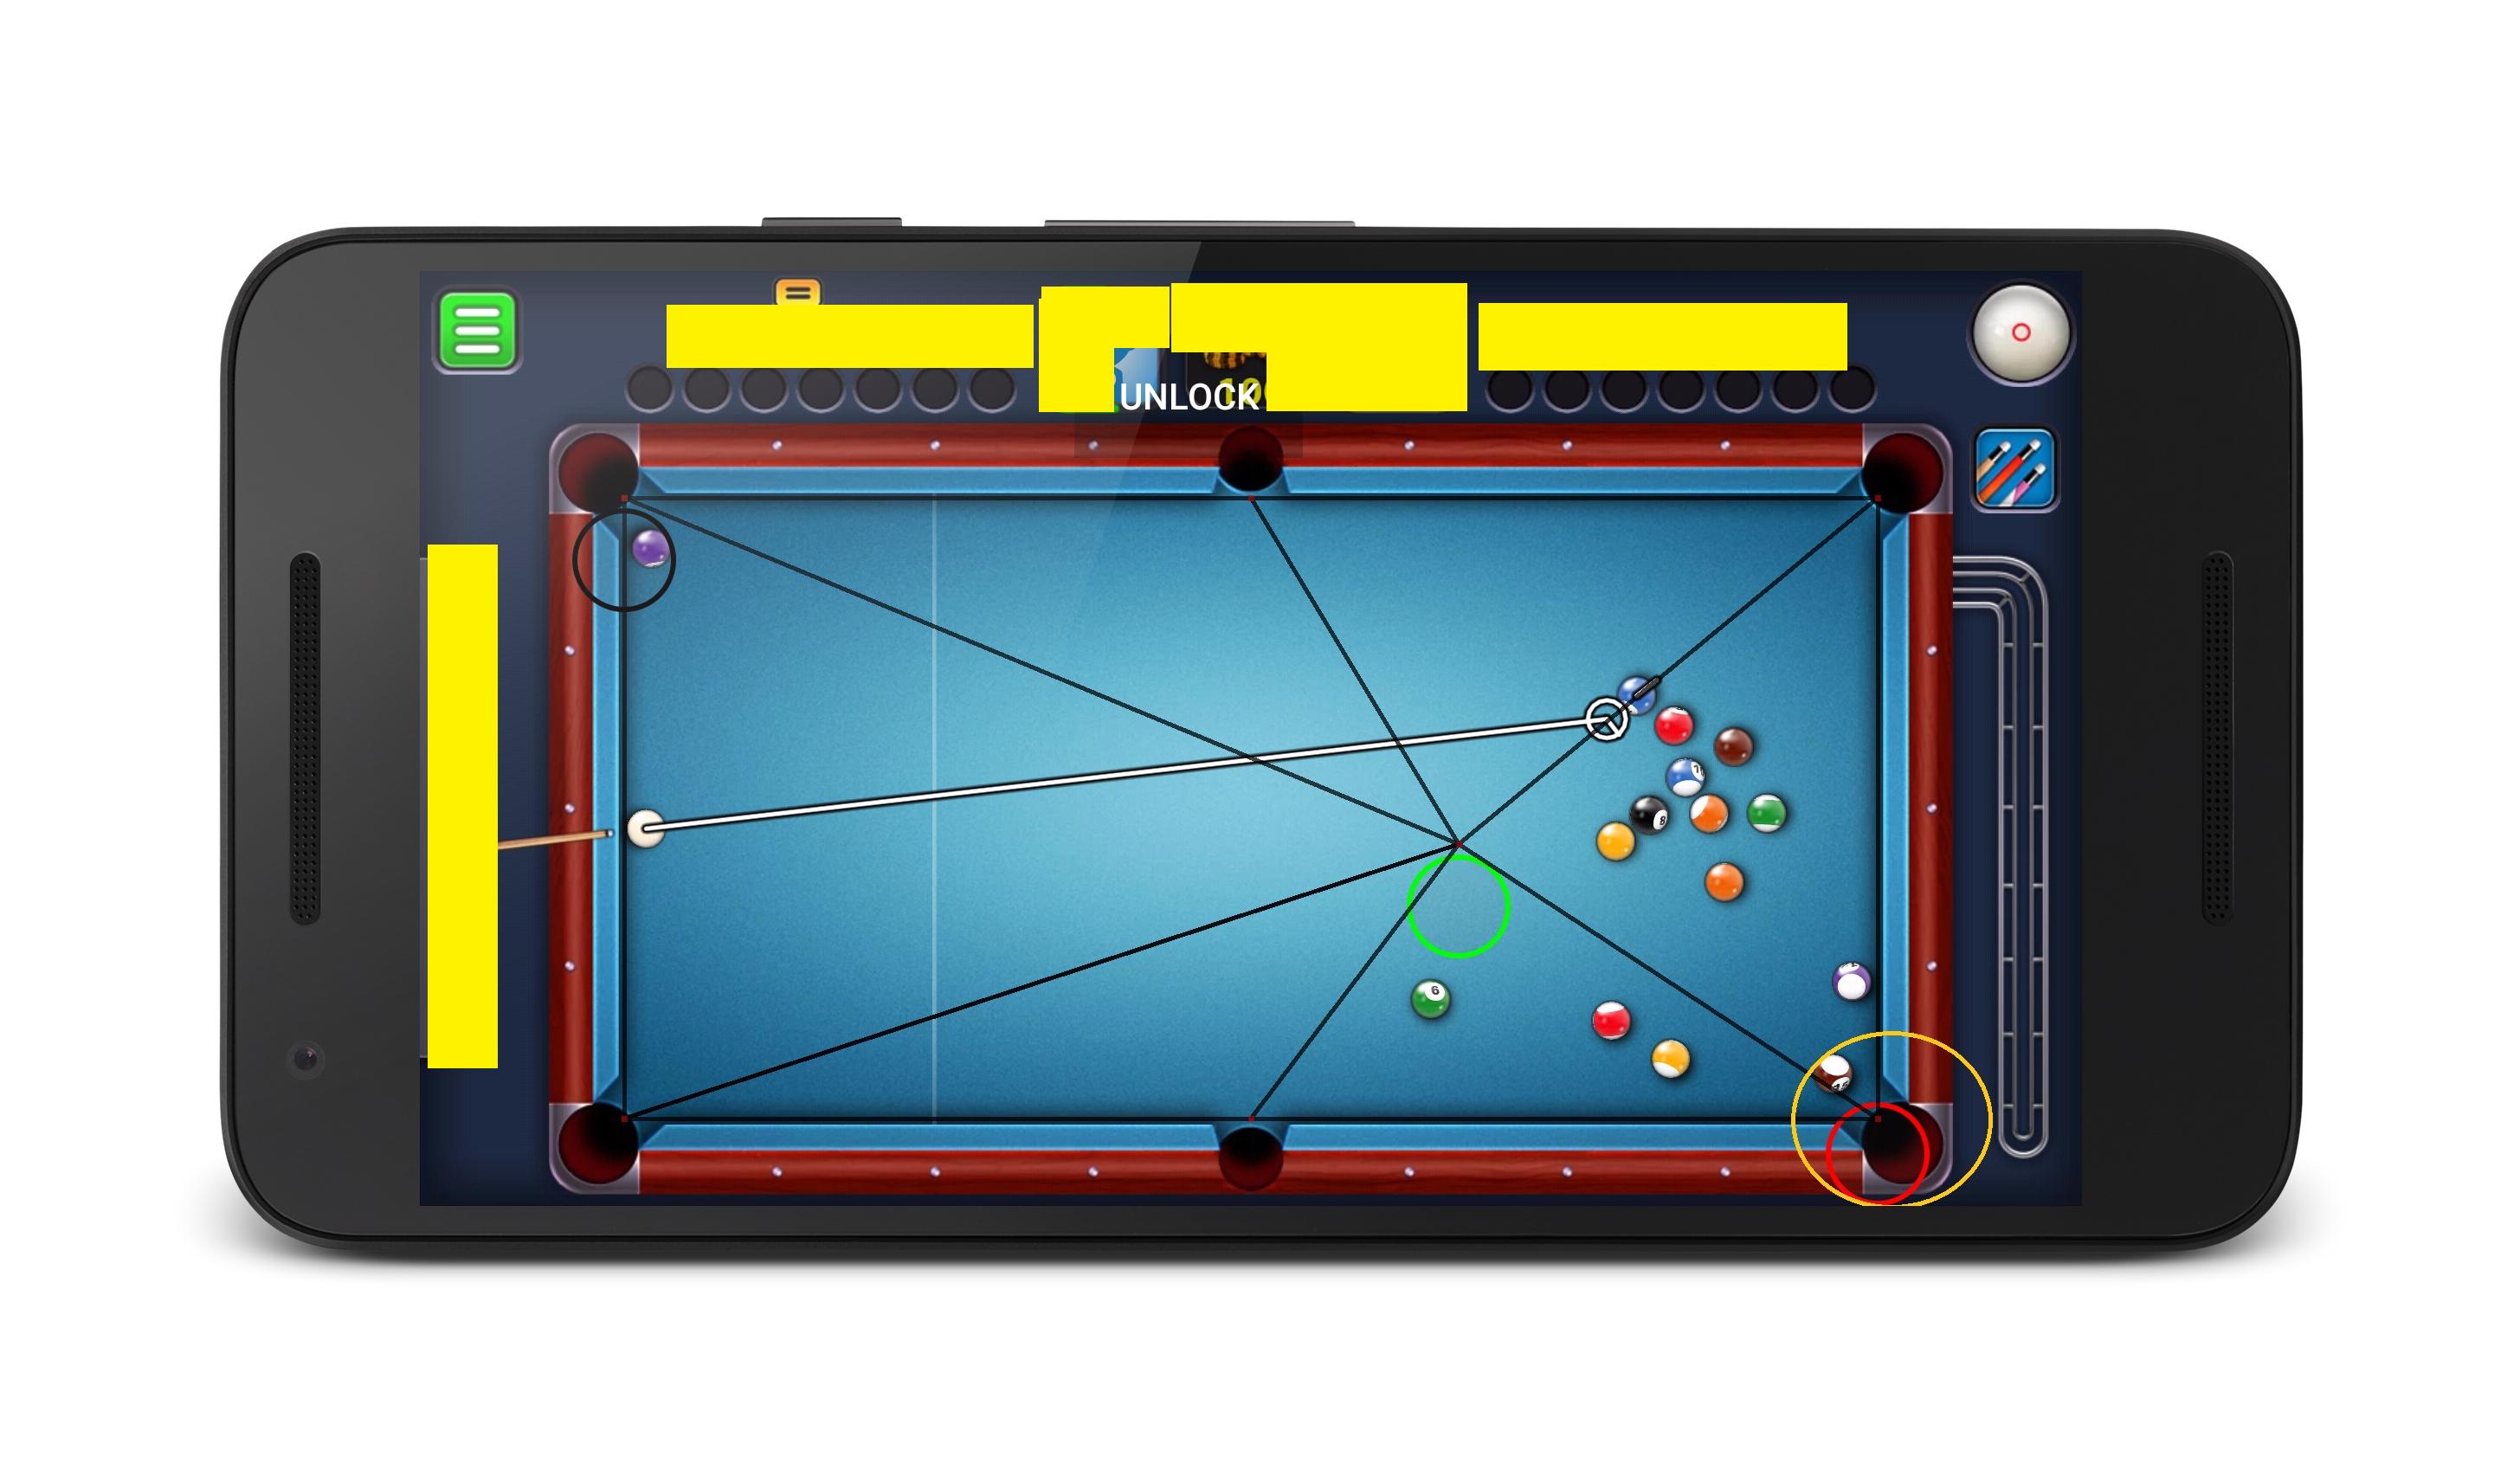 8 Ball Pool Tool for Android - APK Download - 